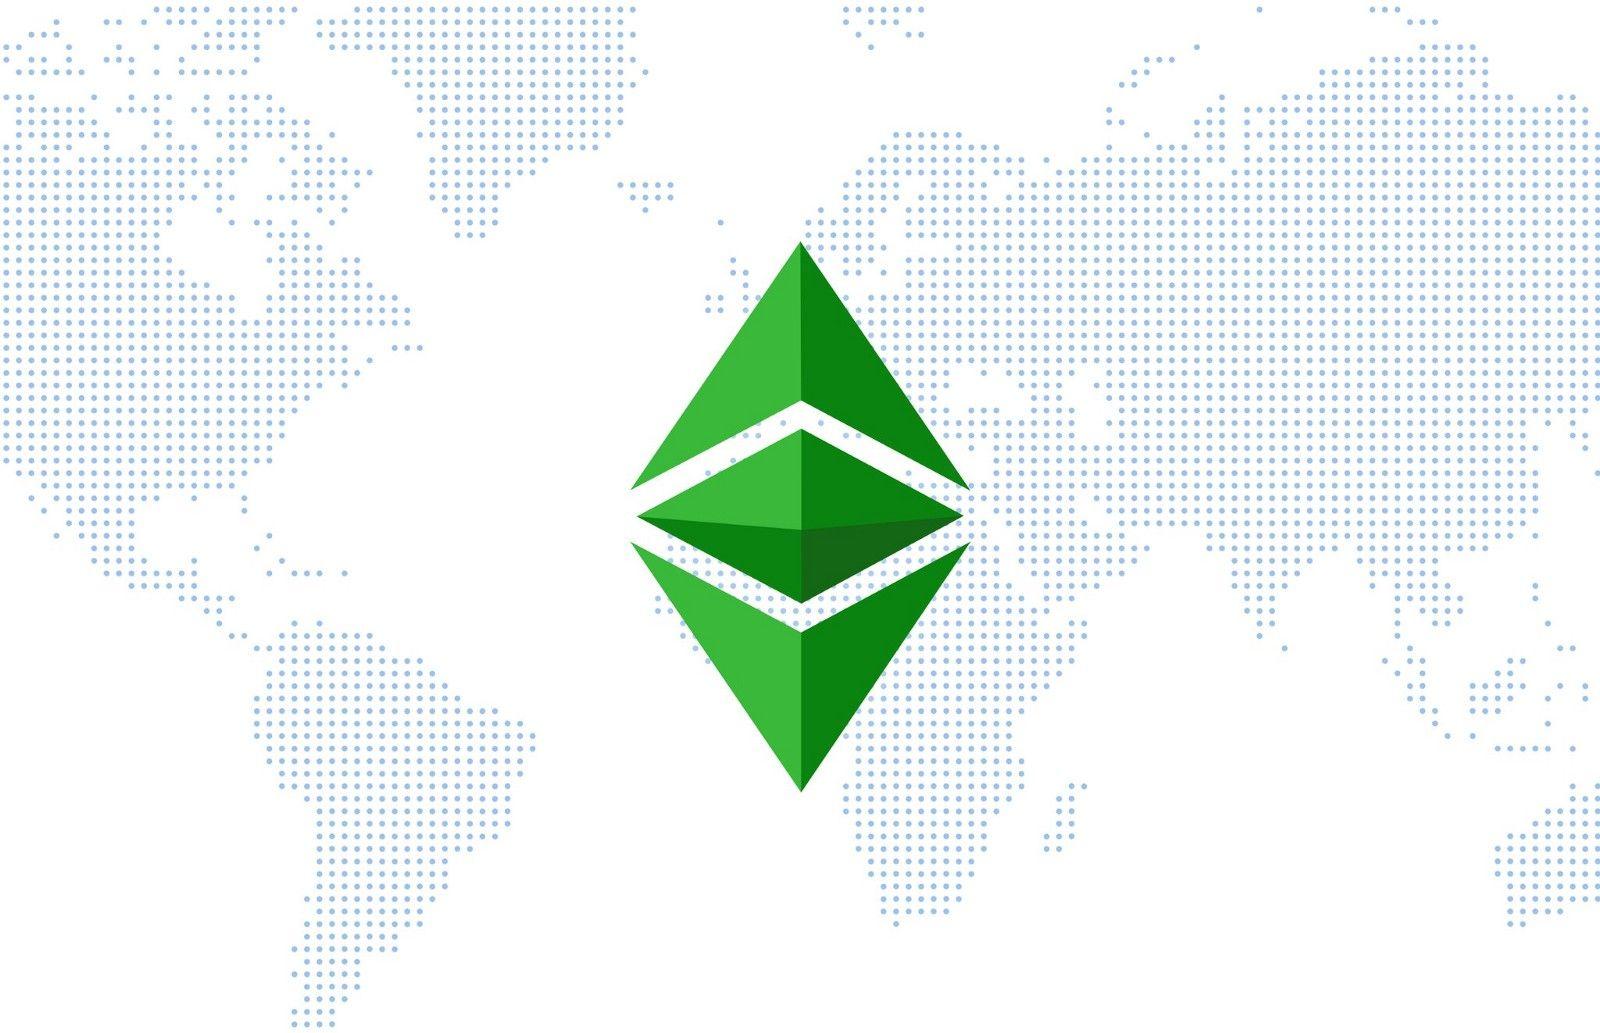 Sideways Green Triangle Logo - Buy and Sell Ethereum Classic on Coinbase Consumer – The Coinbase Blog